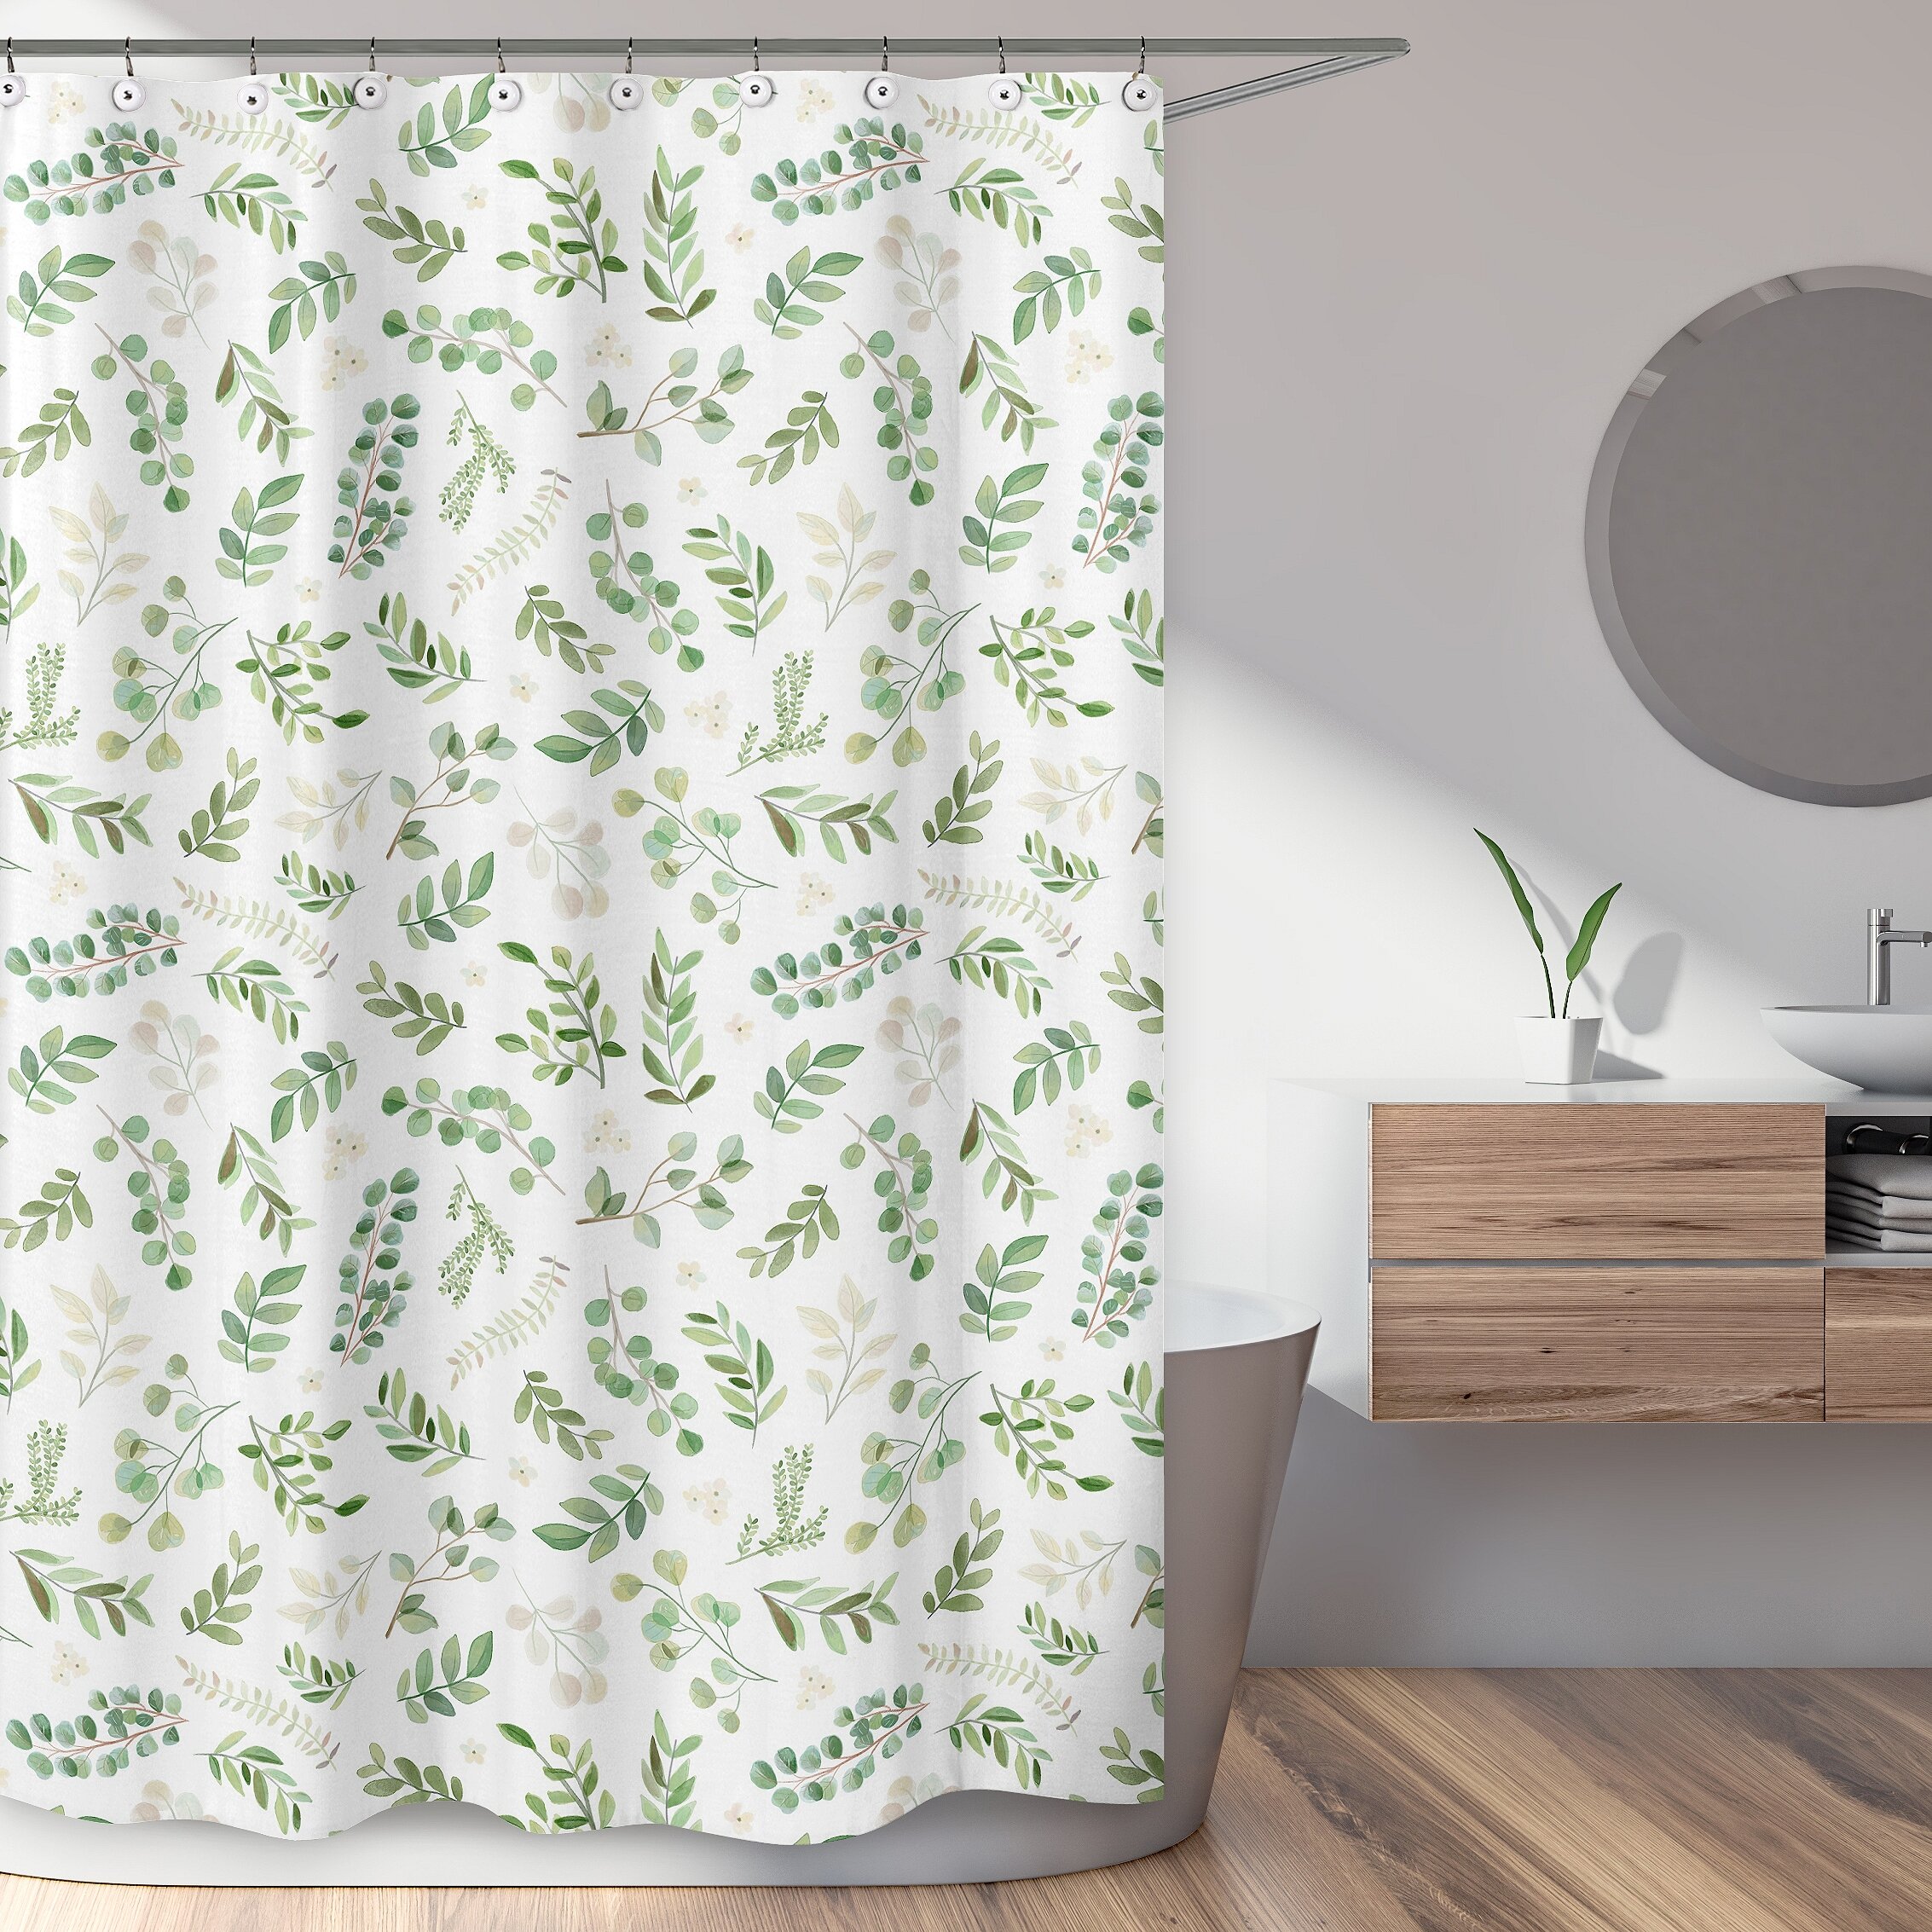 Details about   VCNY Fabric Shower Curtain Nature Watercolor Leaf Print Green White 